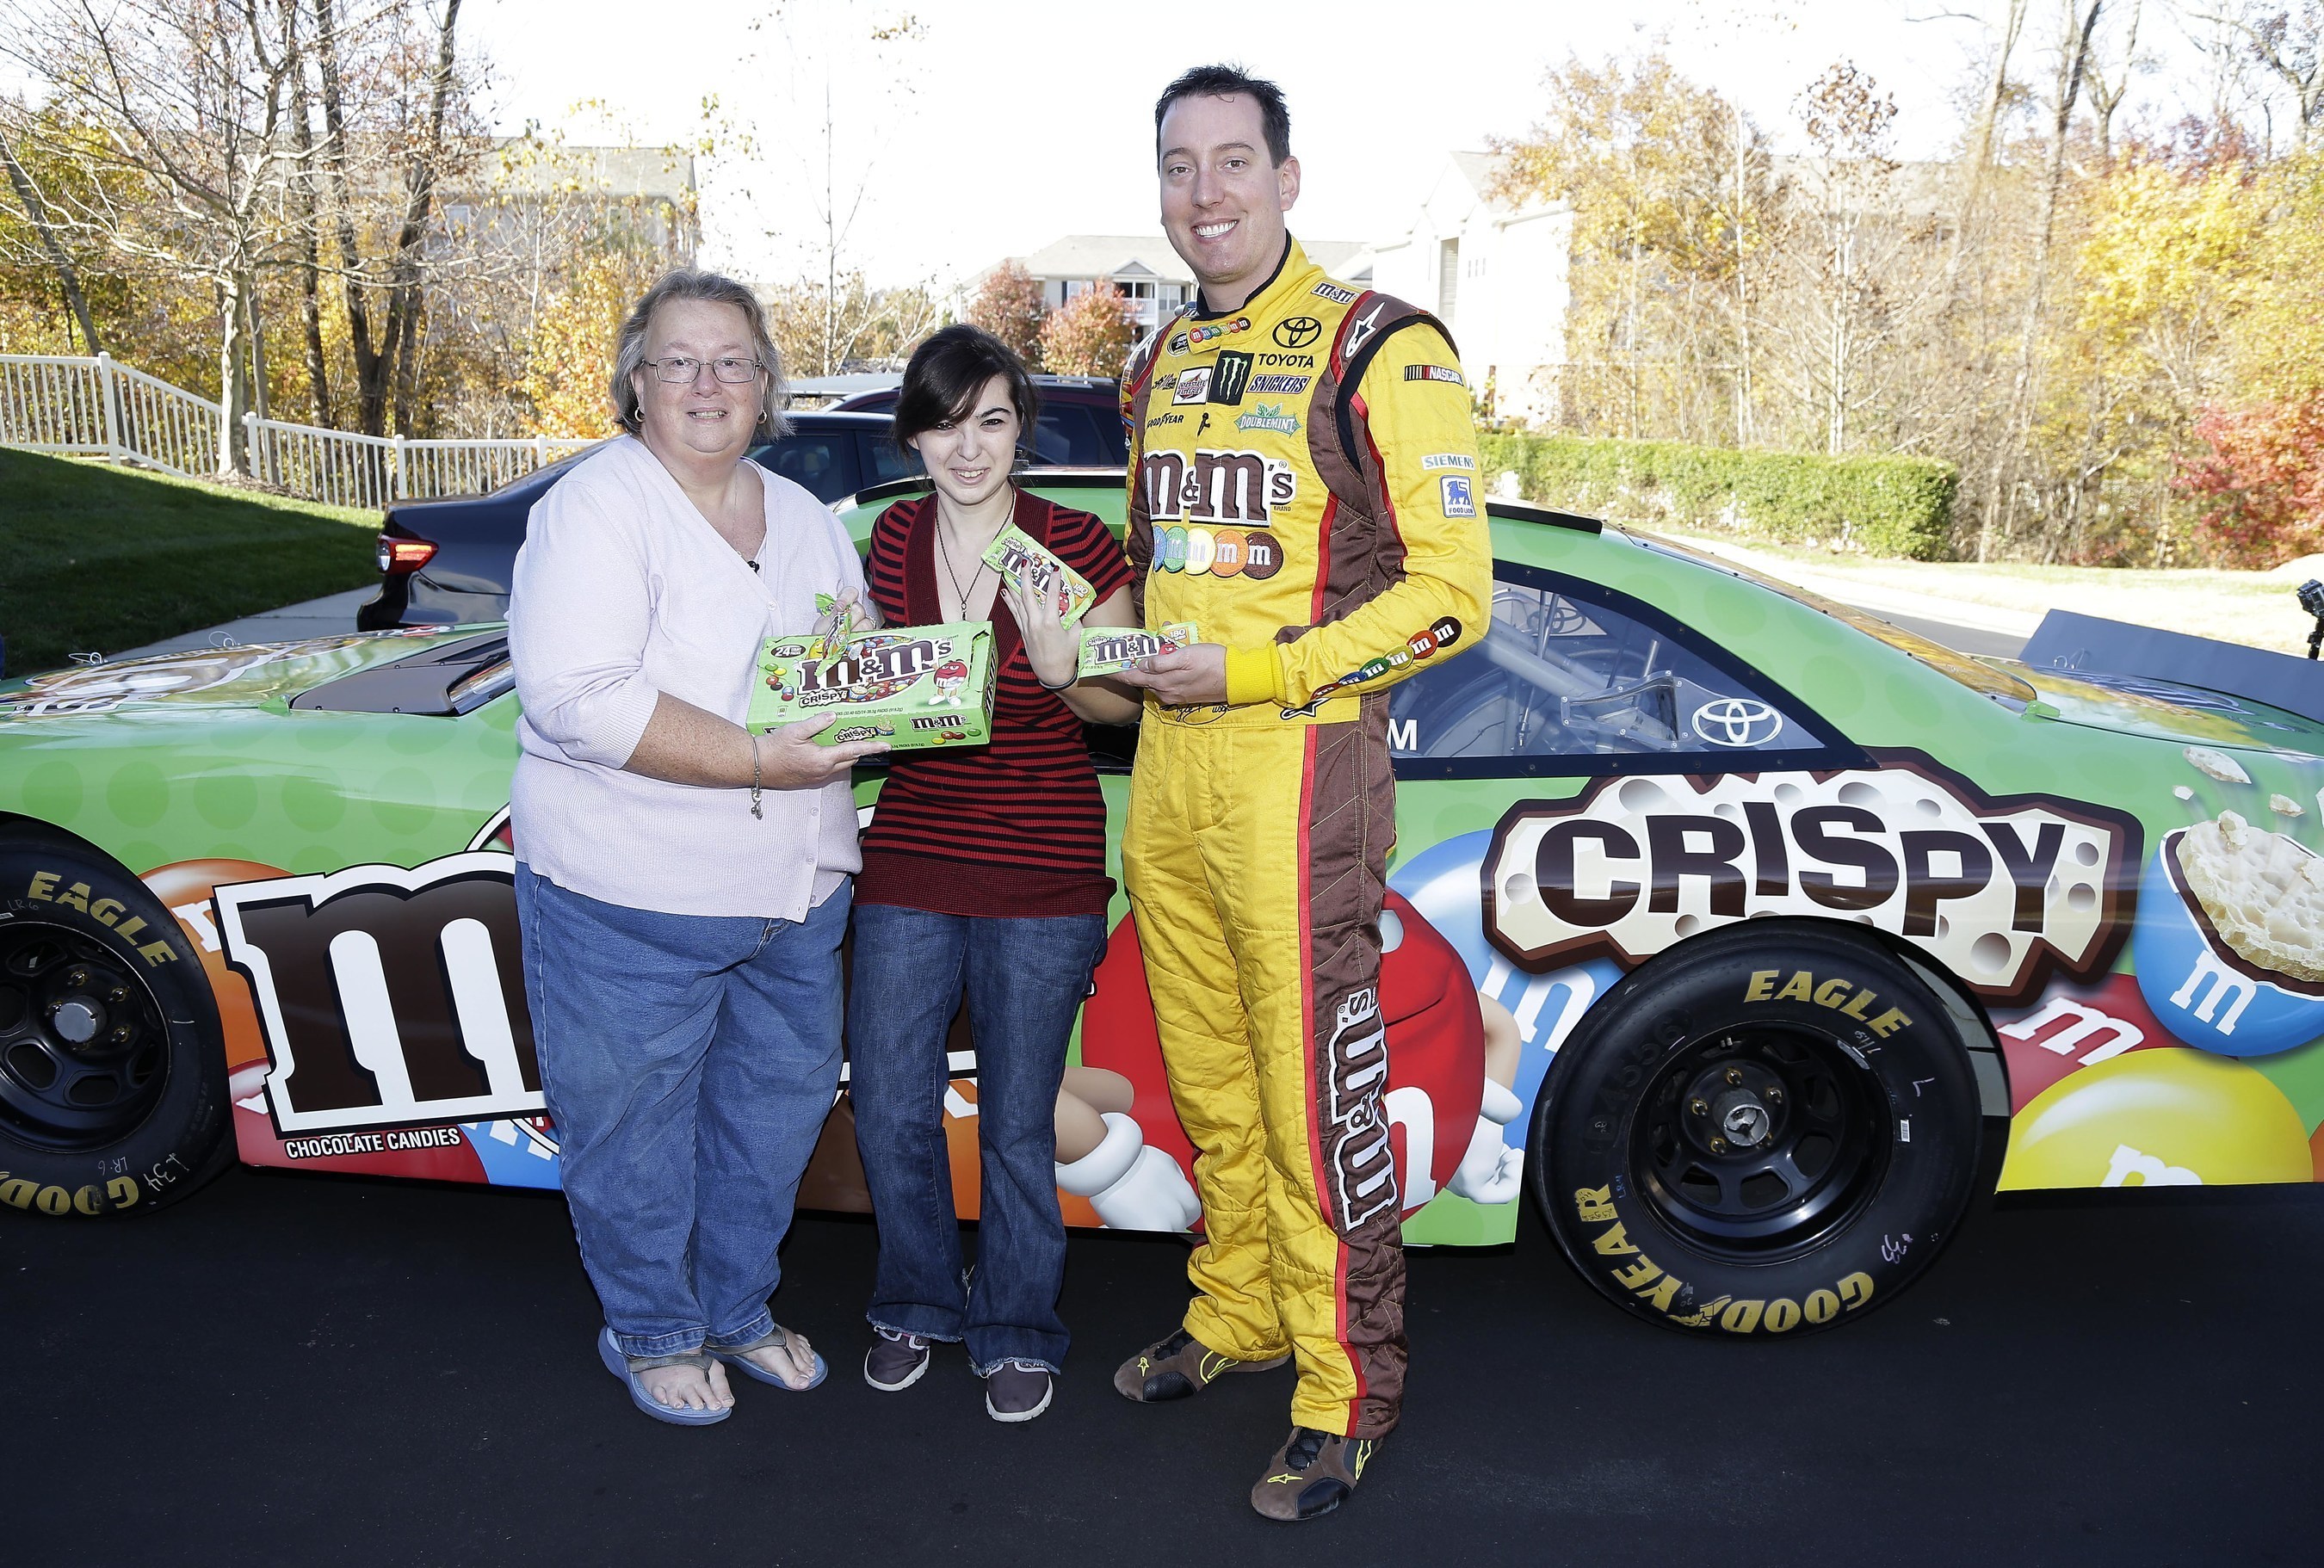 M&M'S(R) Racing driver Kyle Busch, right, makes a speedy delivery of new M&M'S Crispy to super fan Rose Abbate at her home in Charlotte, NC in response to a plea she made on the brand's Facebook page. The delivery is the just the latest example of how the M&M'S(R) Brand is listening and engaging with fans of M&M'S(R) Crispy even before the product officially returns to stores in January after a 10-year hiatus.